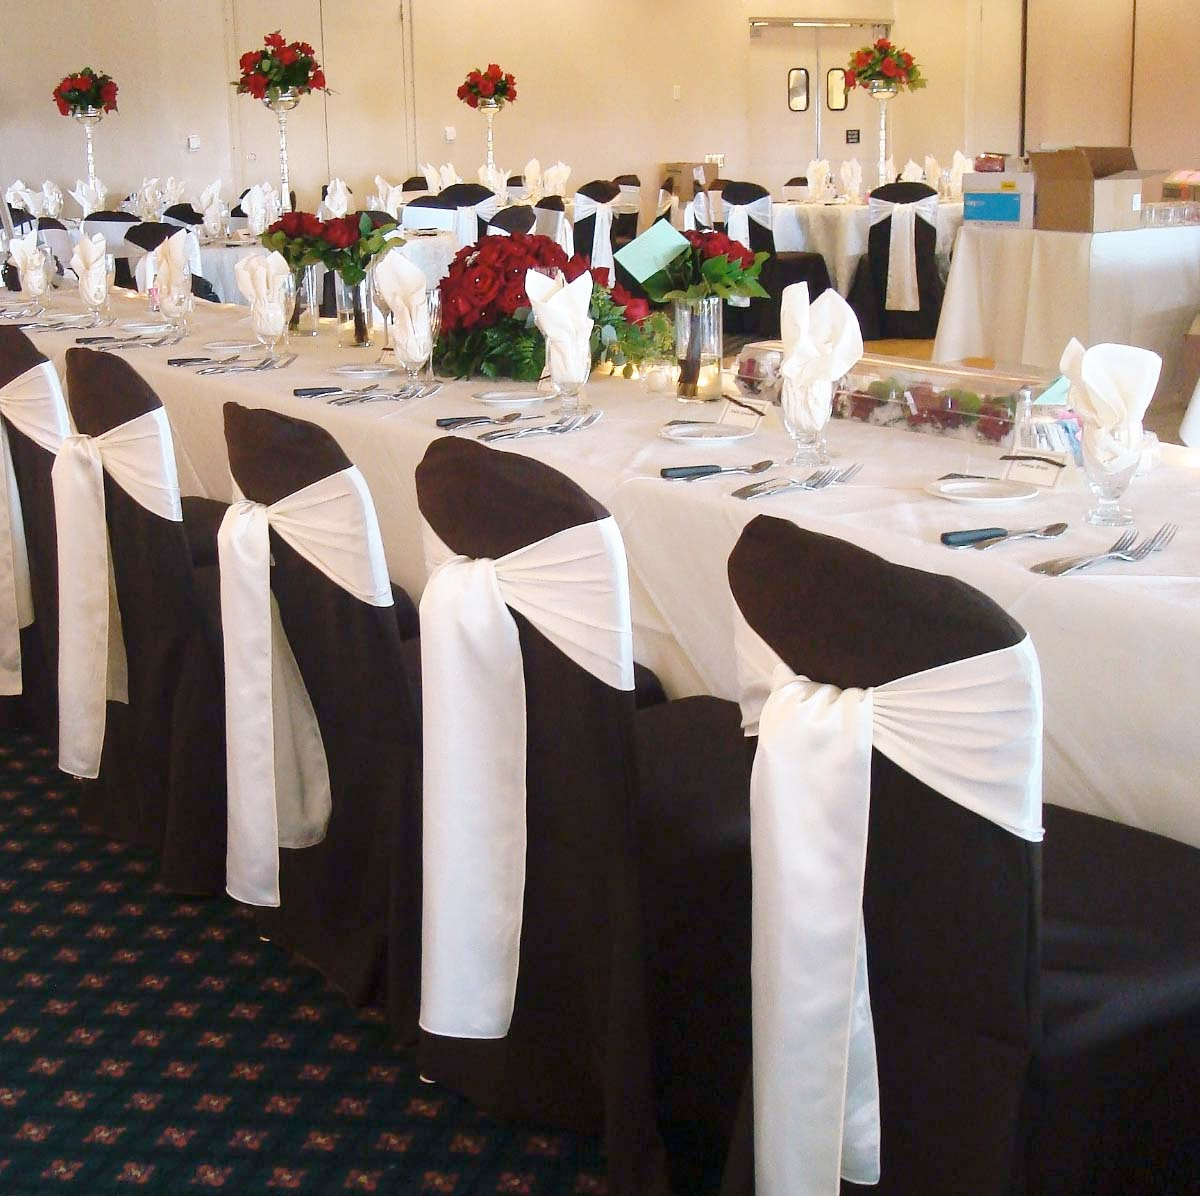 Wedding Chair Cover Hire In Essex Designer Chair Covers To Go